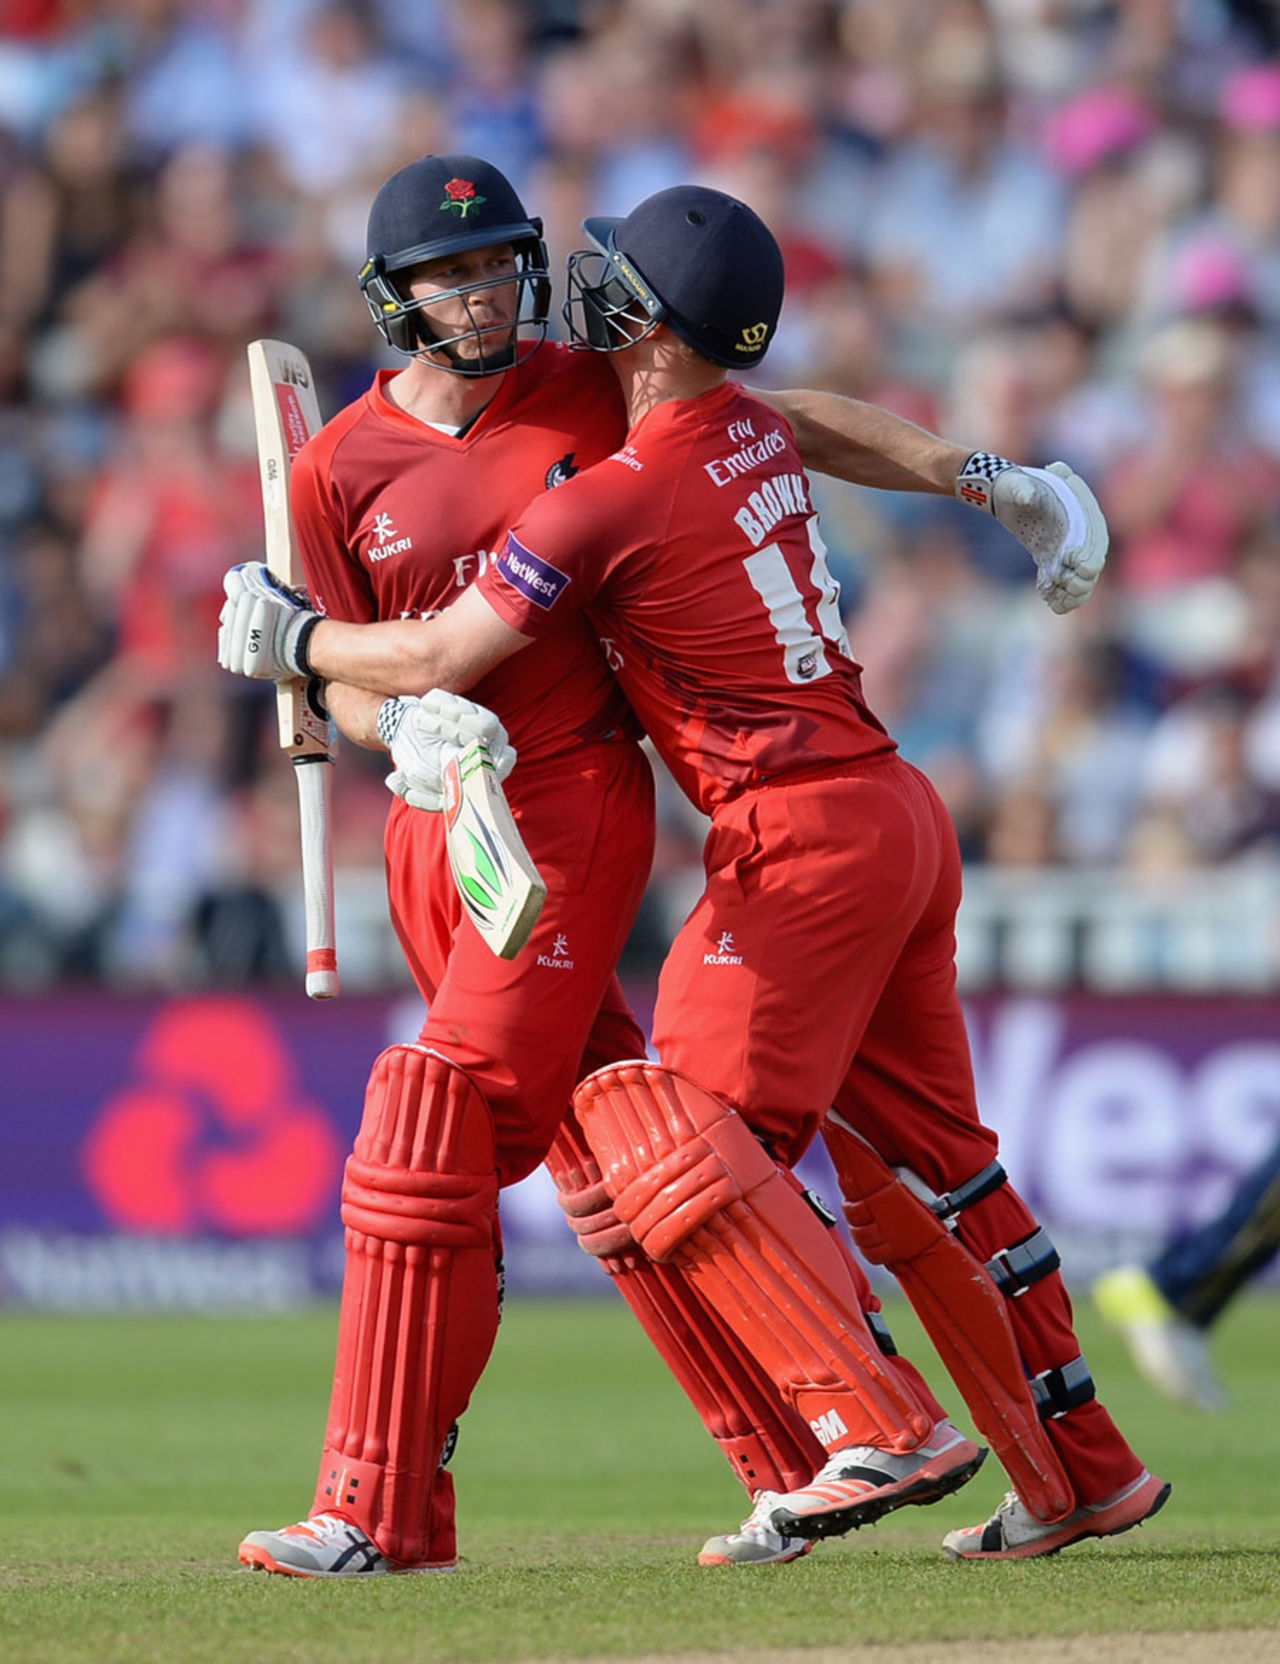 James Faulkner celebrates with Karl Brown after the Australian thumped two sixes to seal Lancashire's place in the final, Hampshire v Lancashire, NatWest T20 Blast, Semi-final, Edgbaston, August 29, 2015